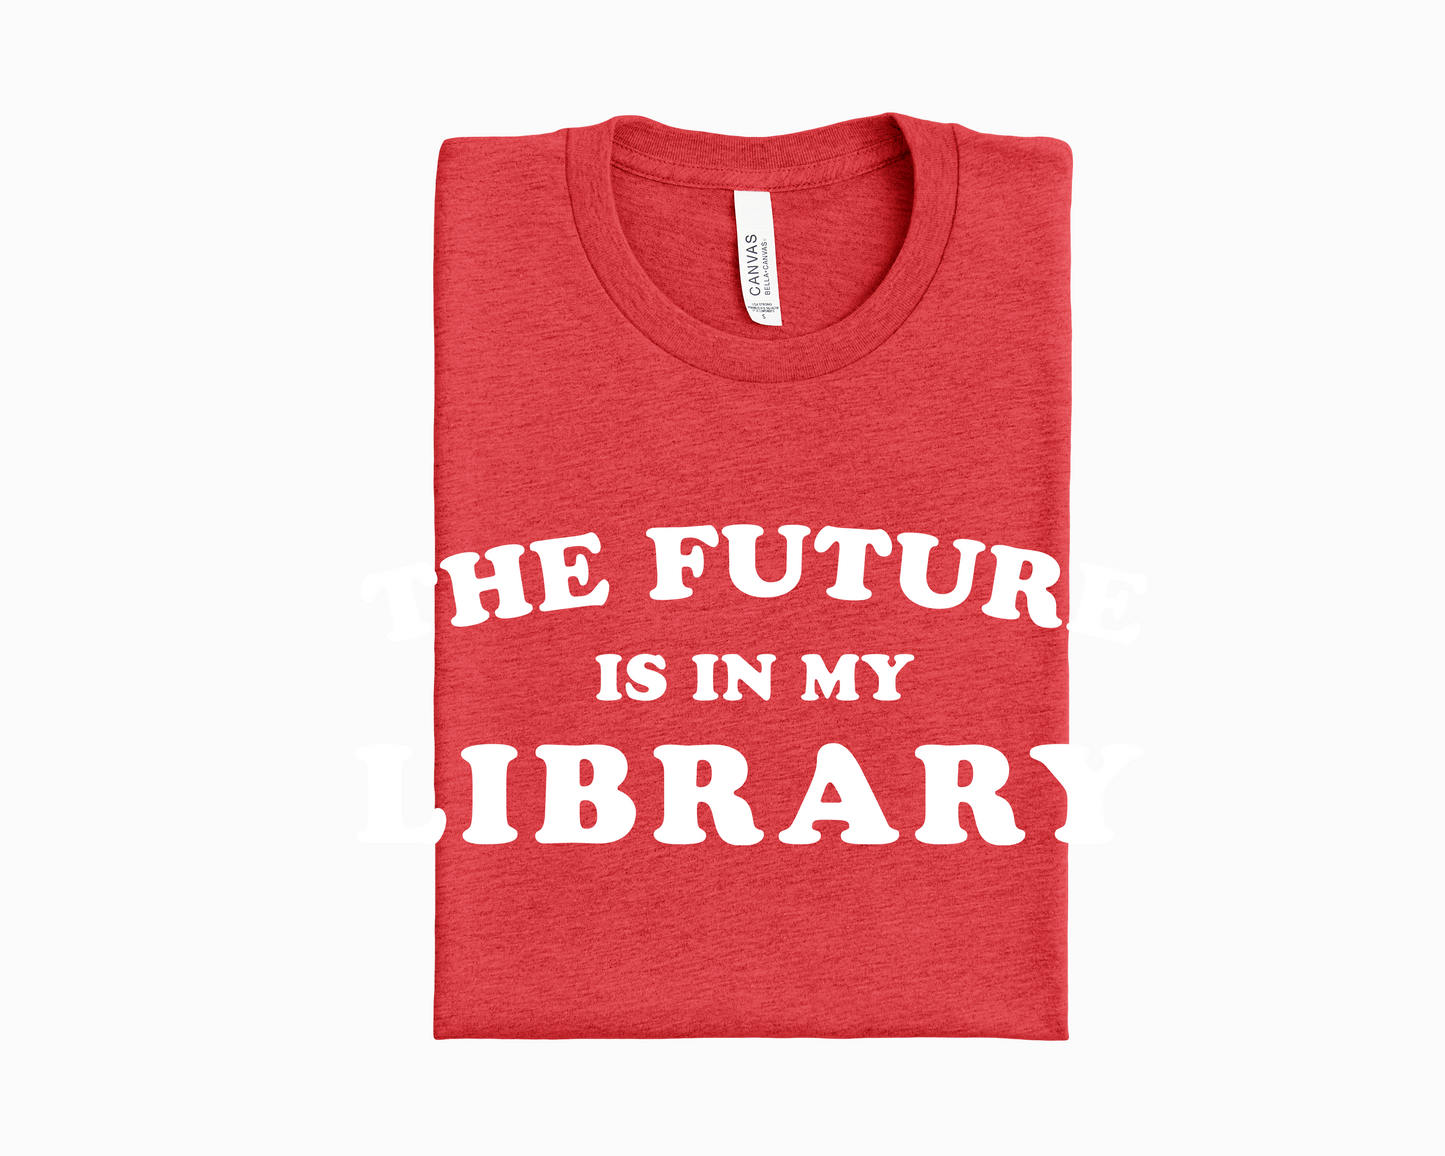 The Future is in My Library Short Sleeve Tshirt